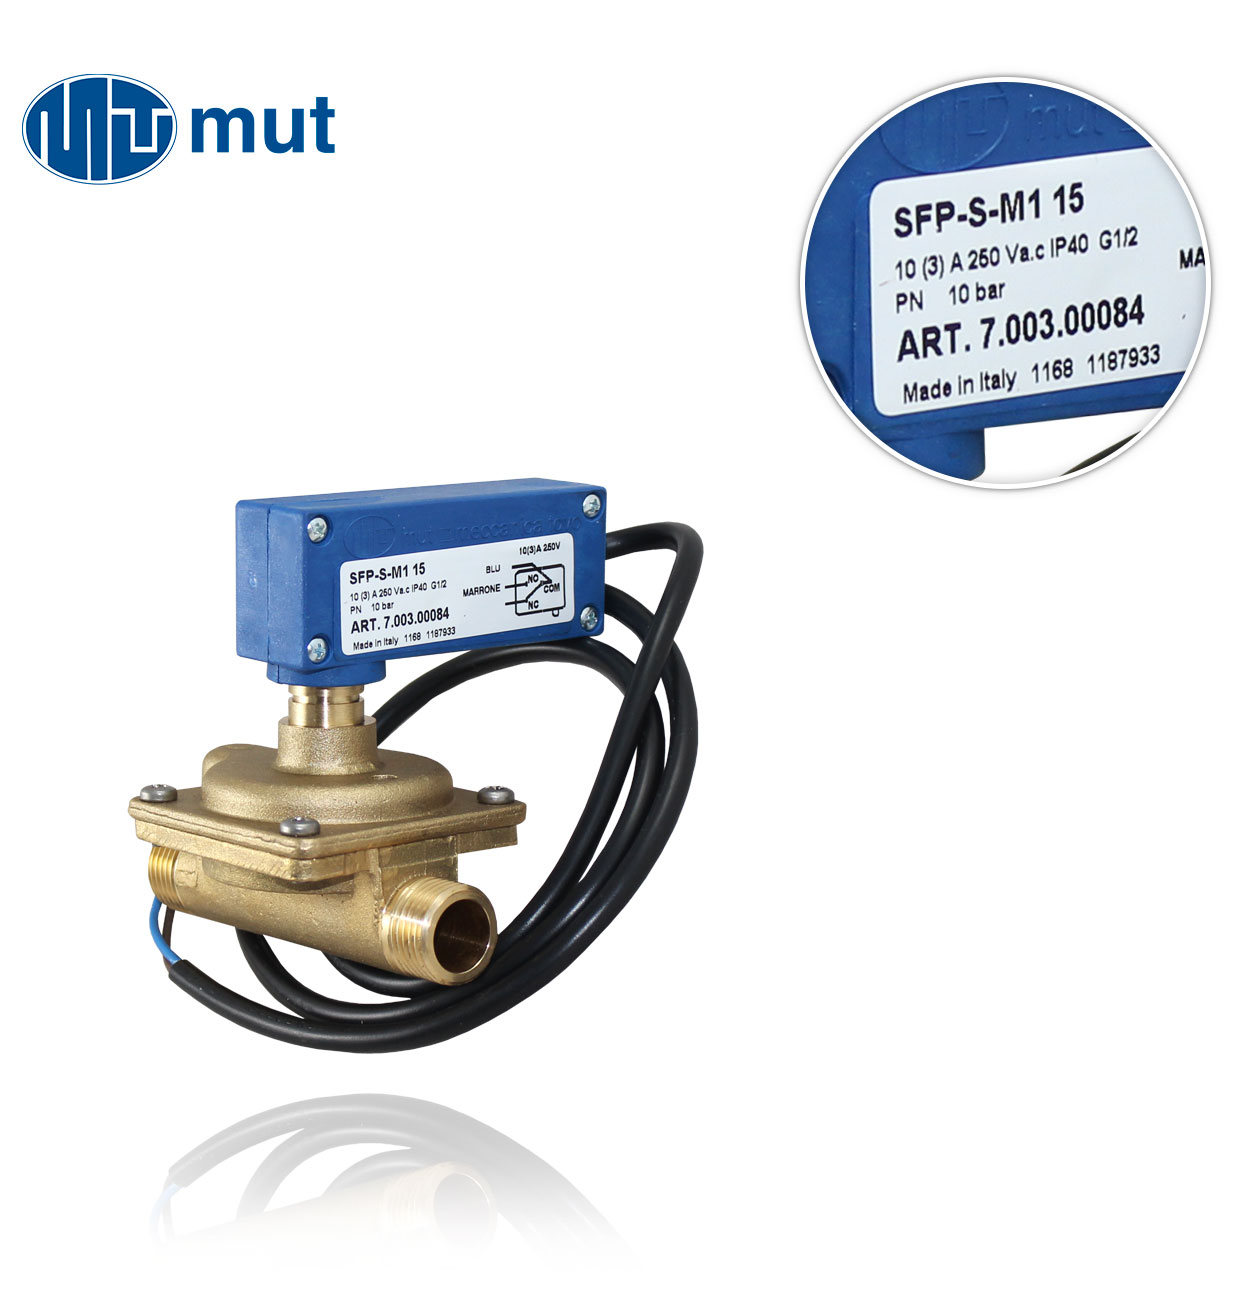 SFP-S-M1 1/2" 1MICR. MUT 10(3)A DIFFERENTIAL PRESSURE SWITCH